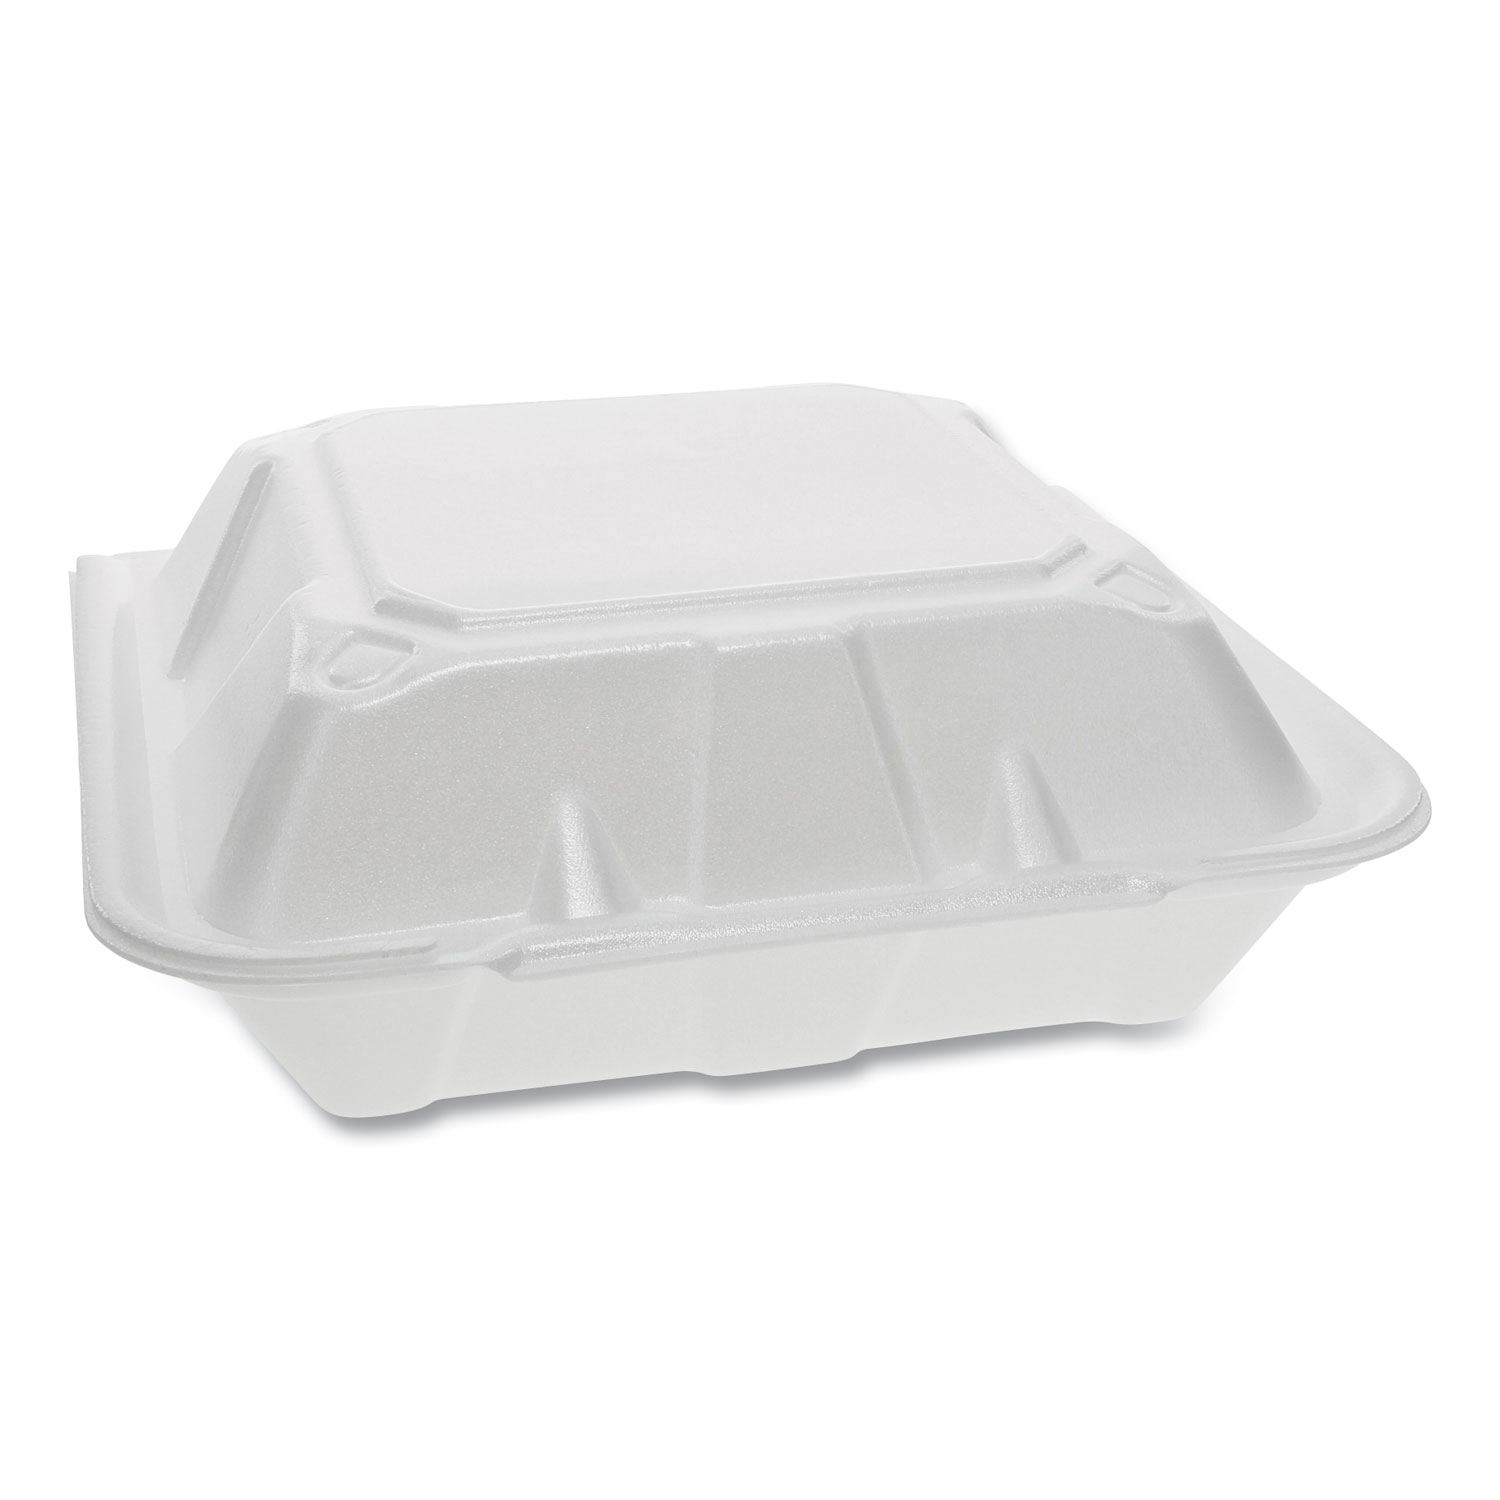  Pactiv YTD199030000 Foam Hinged Lid Containers, Dual Tab Lock, 9.13 x 9 x 3.25, 3-Compartment, White, 150/Carton (PCTYTD199030000) 